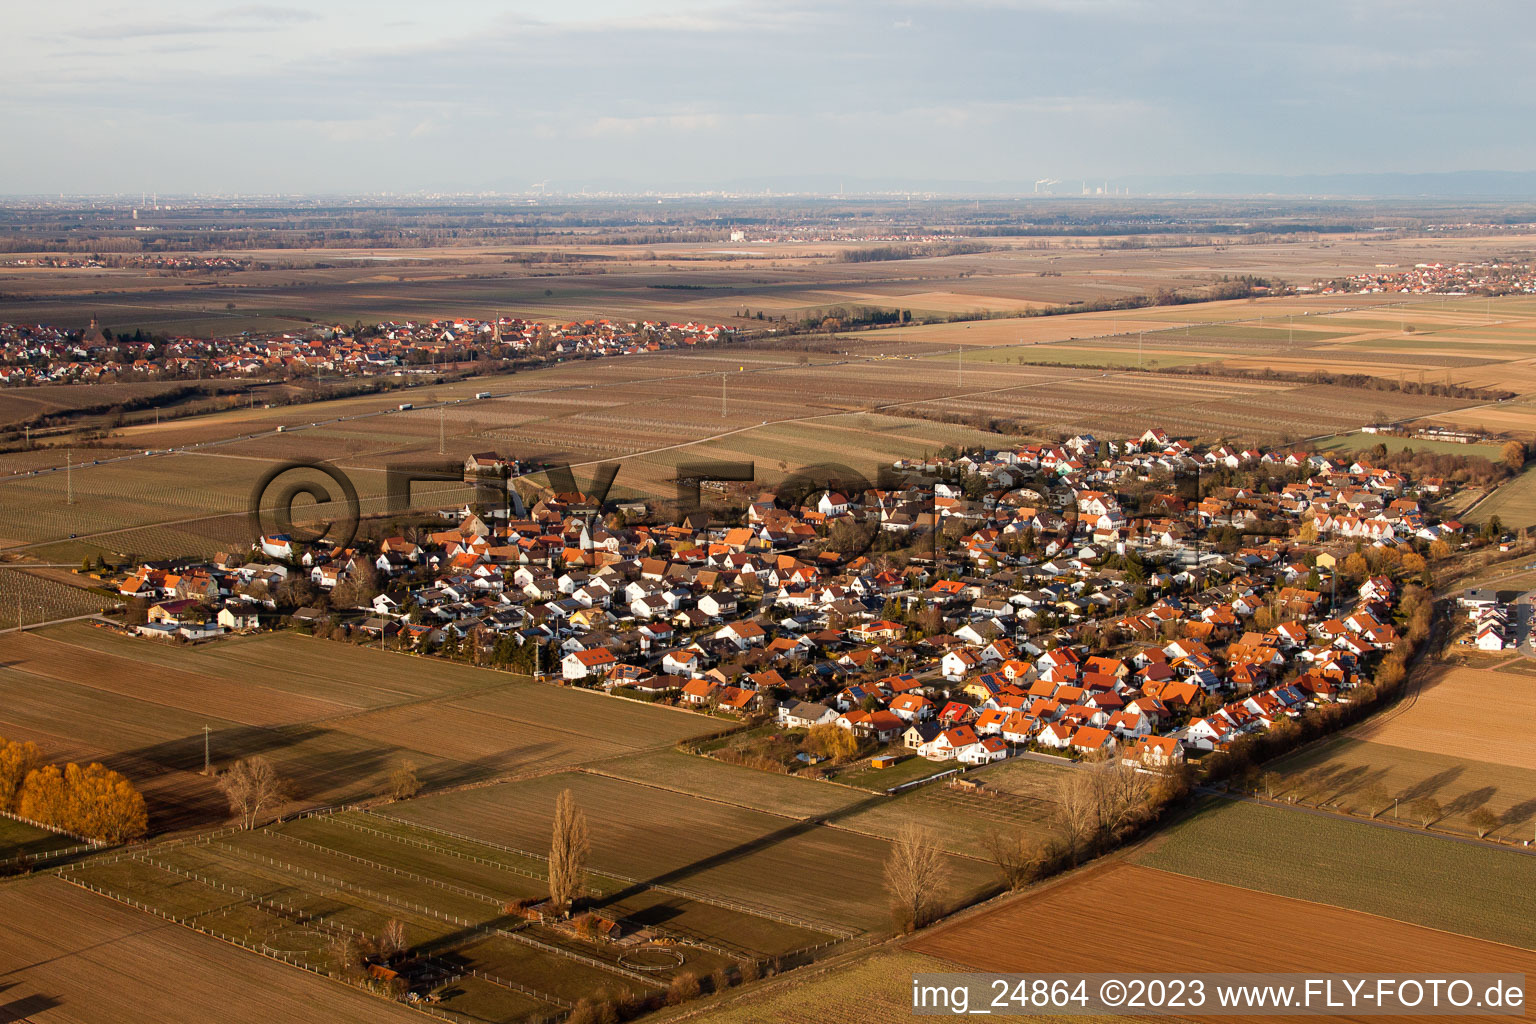 Bornheim in the state Rhineland-Palatinate, Germany from above